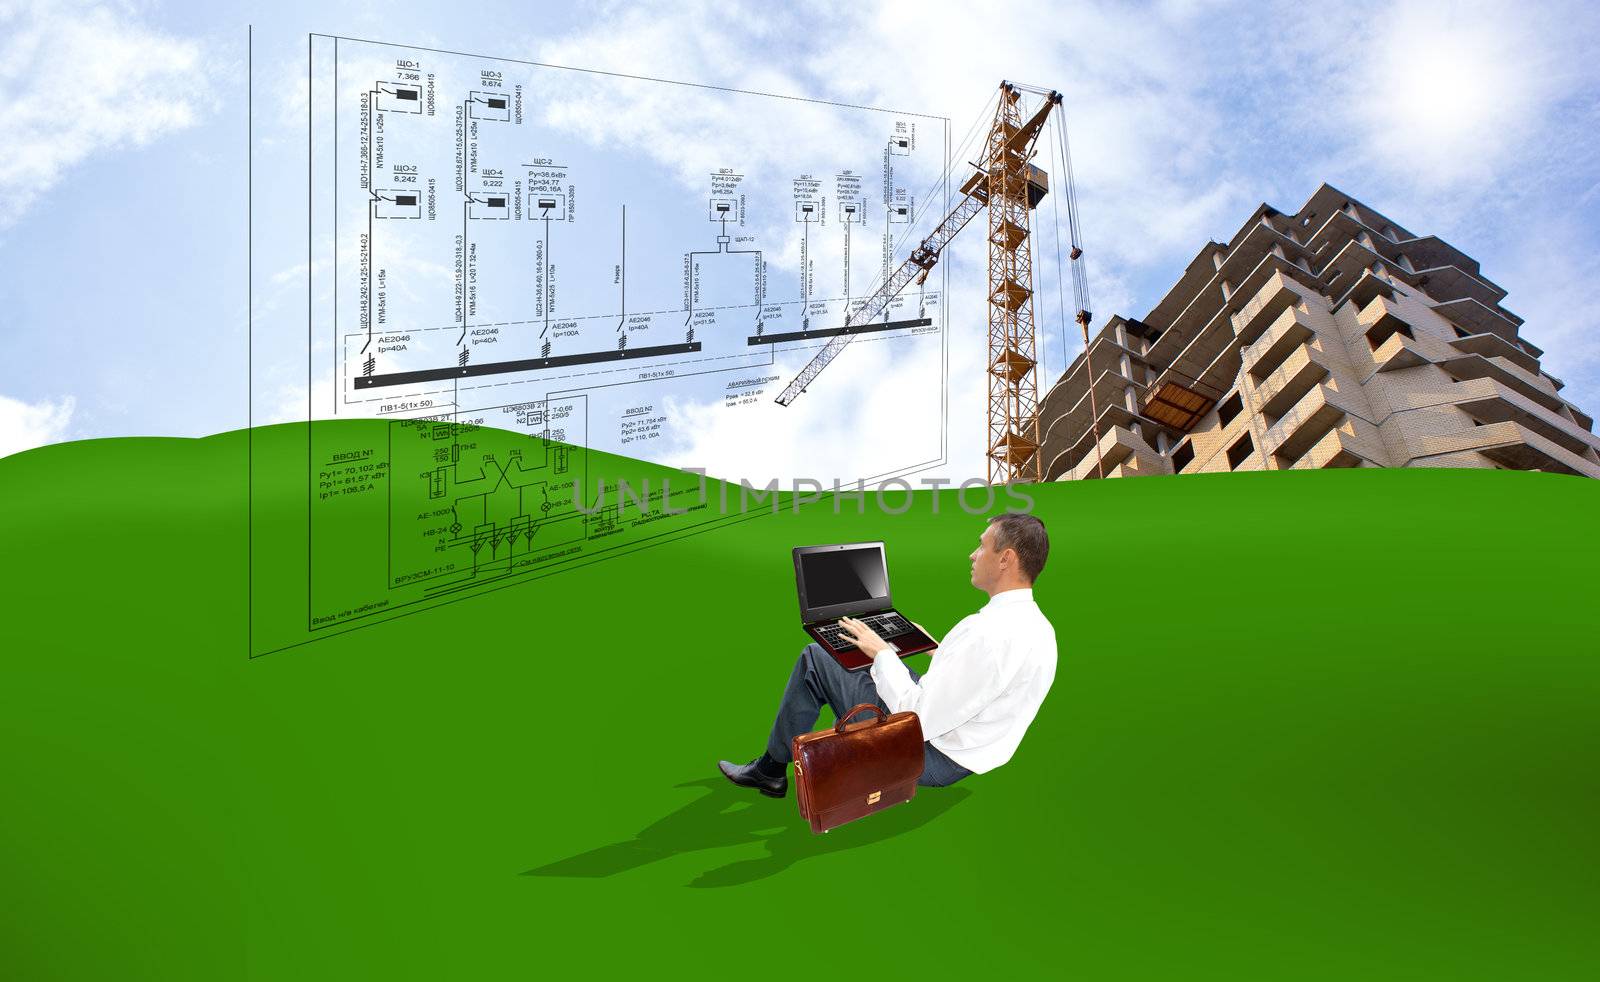 Innovative engineering building designing on a green field under the blue sky